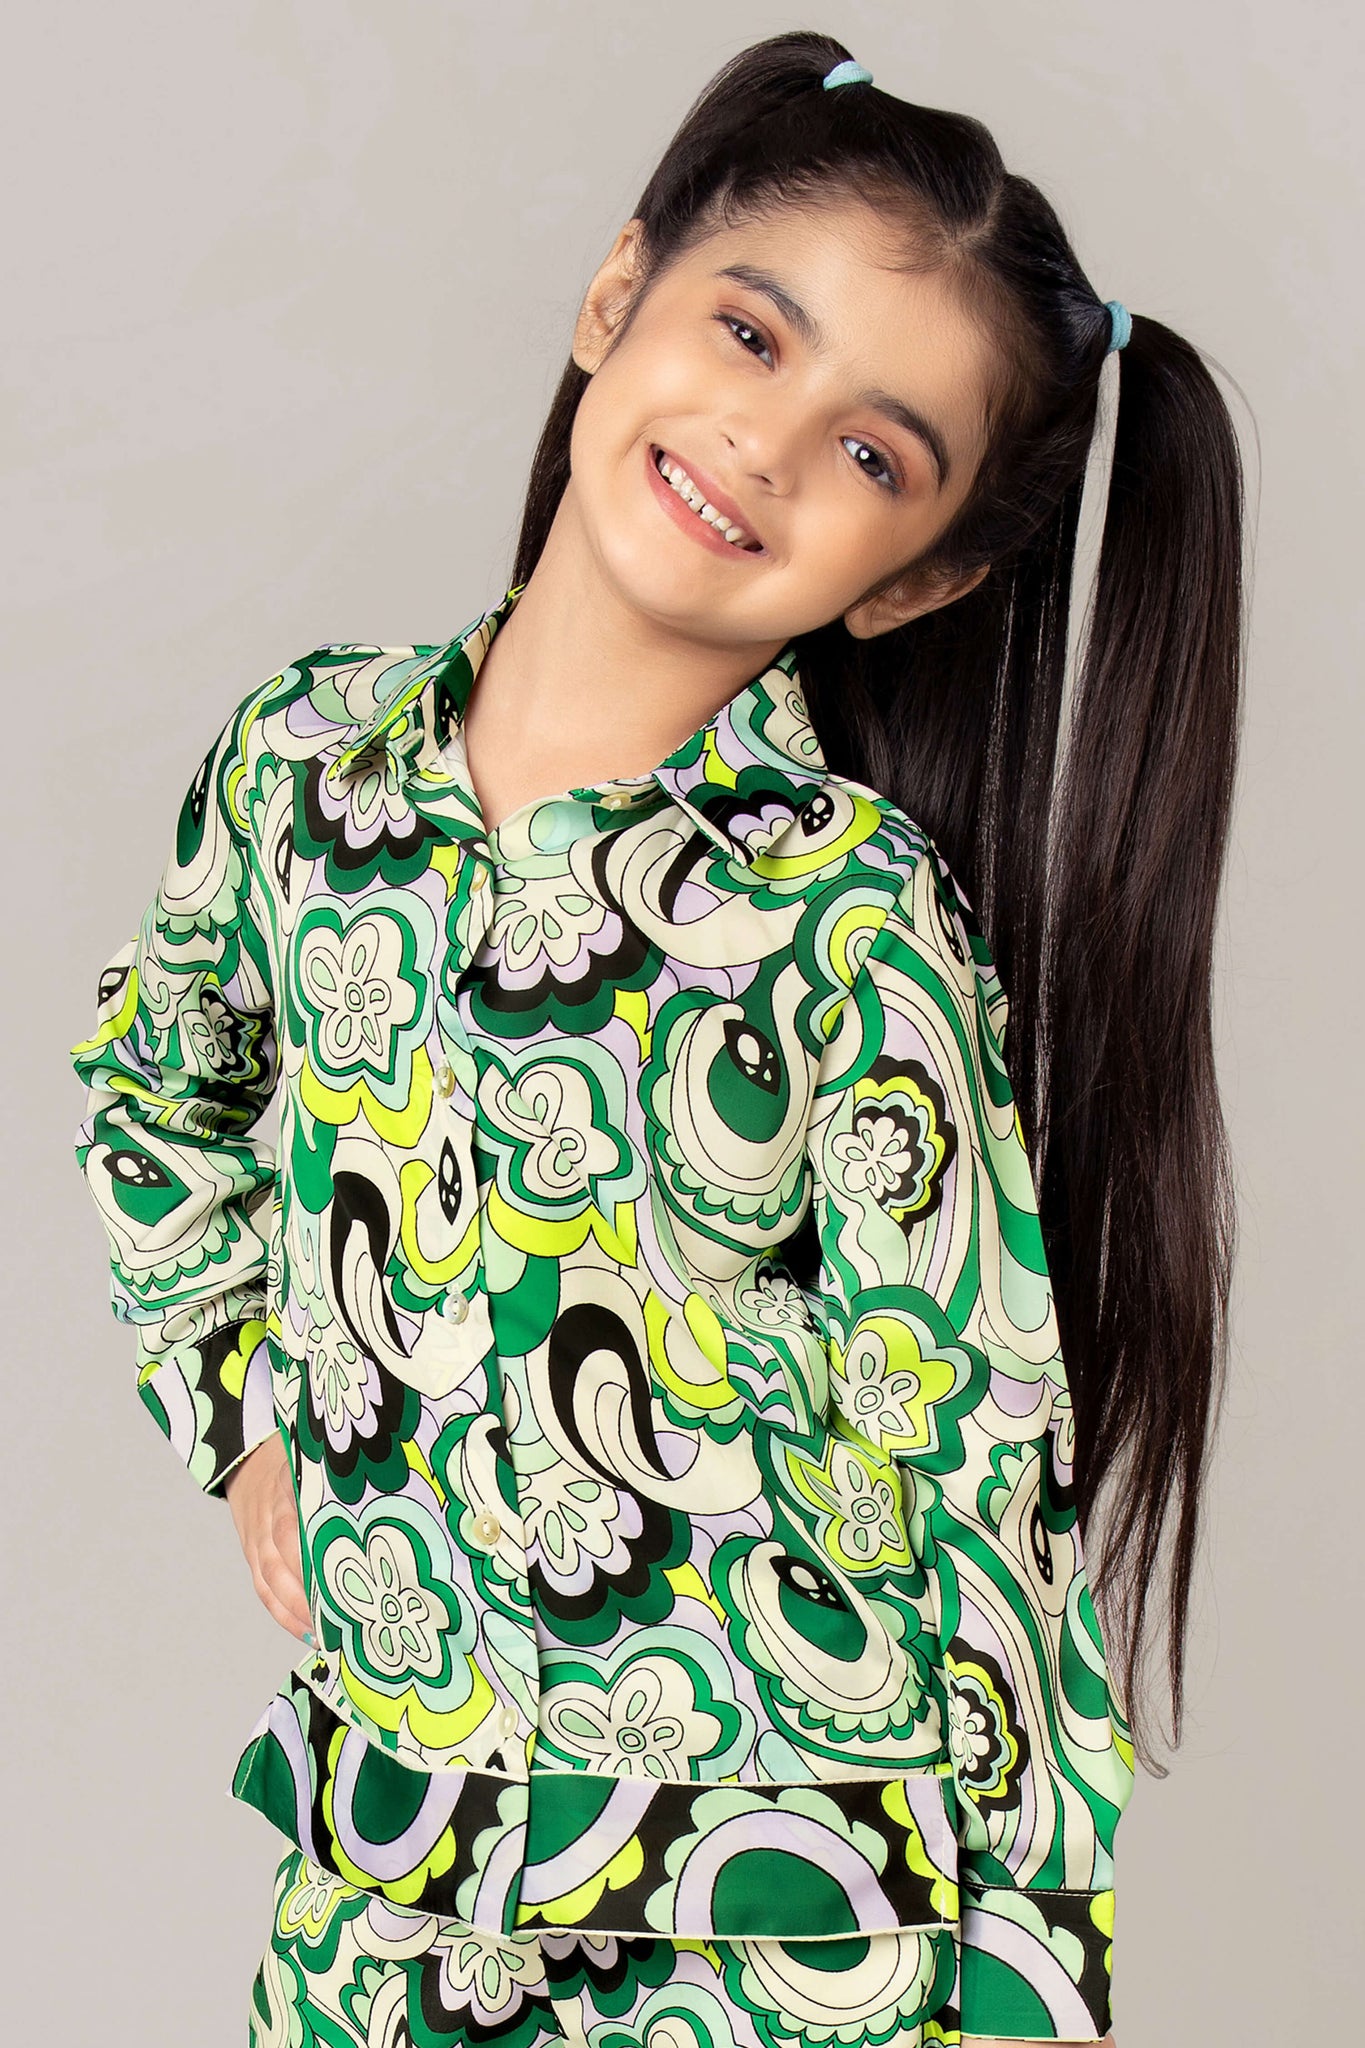 Abstract Collar Neck Shirt For Girls